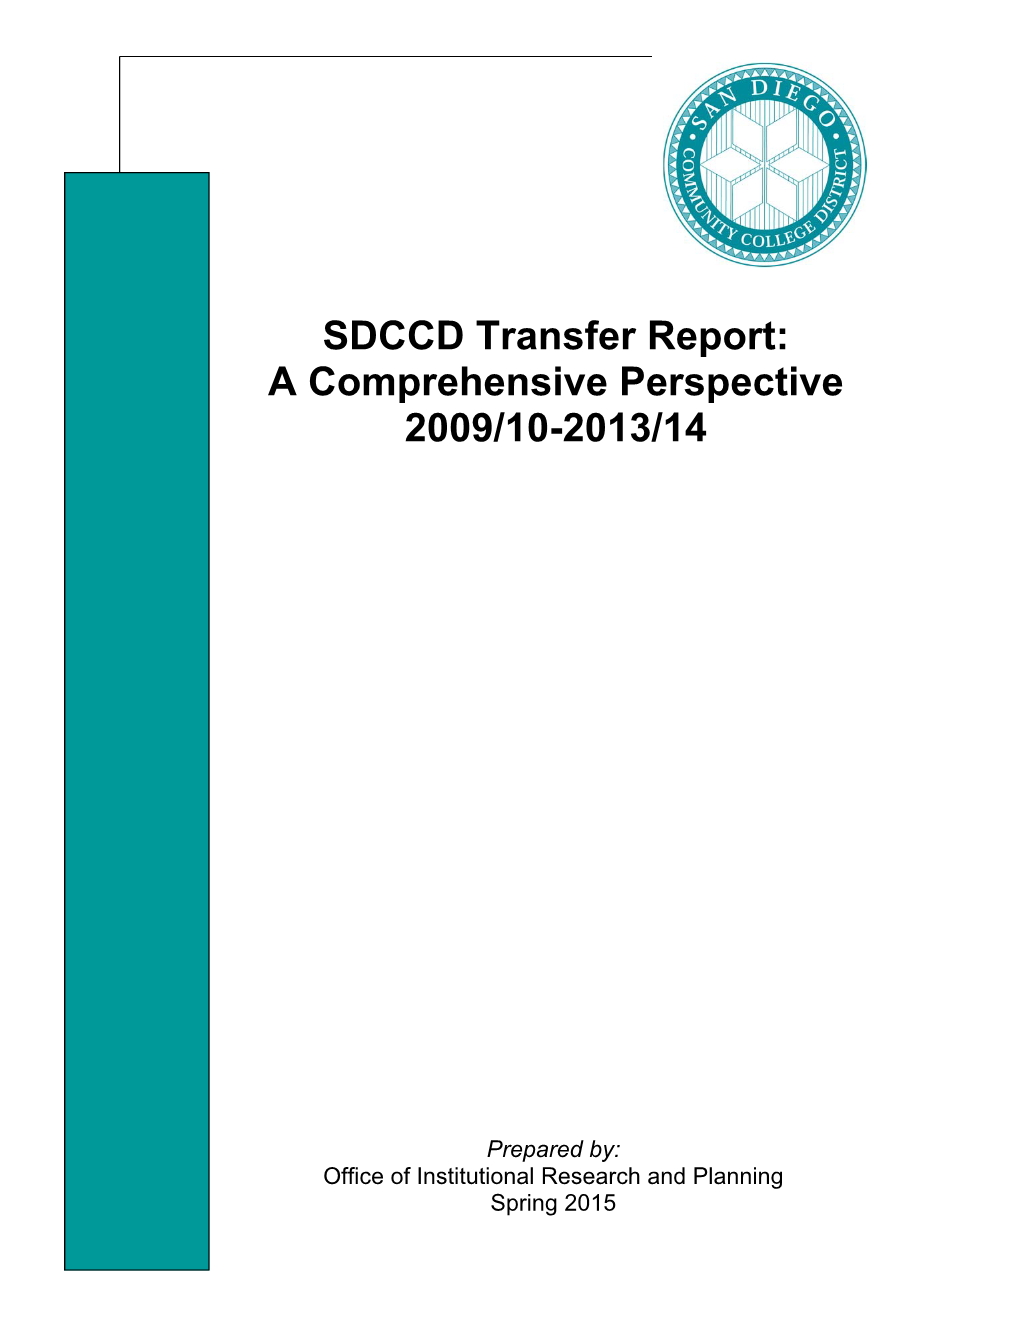 SDCCD Transfer Report: a Comprehensive Perspective 2009/10-2013/14